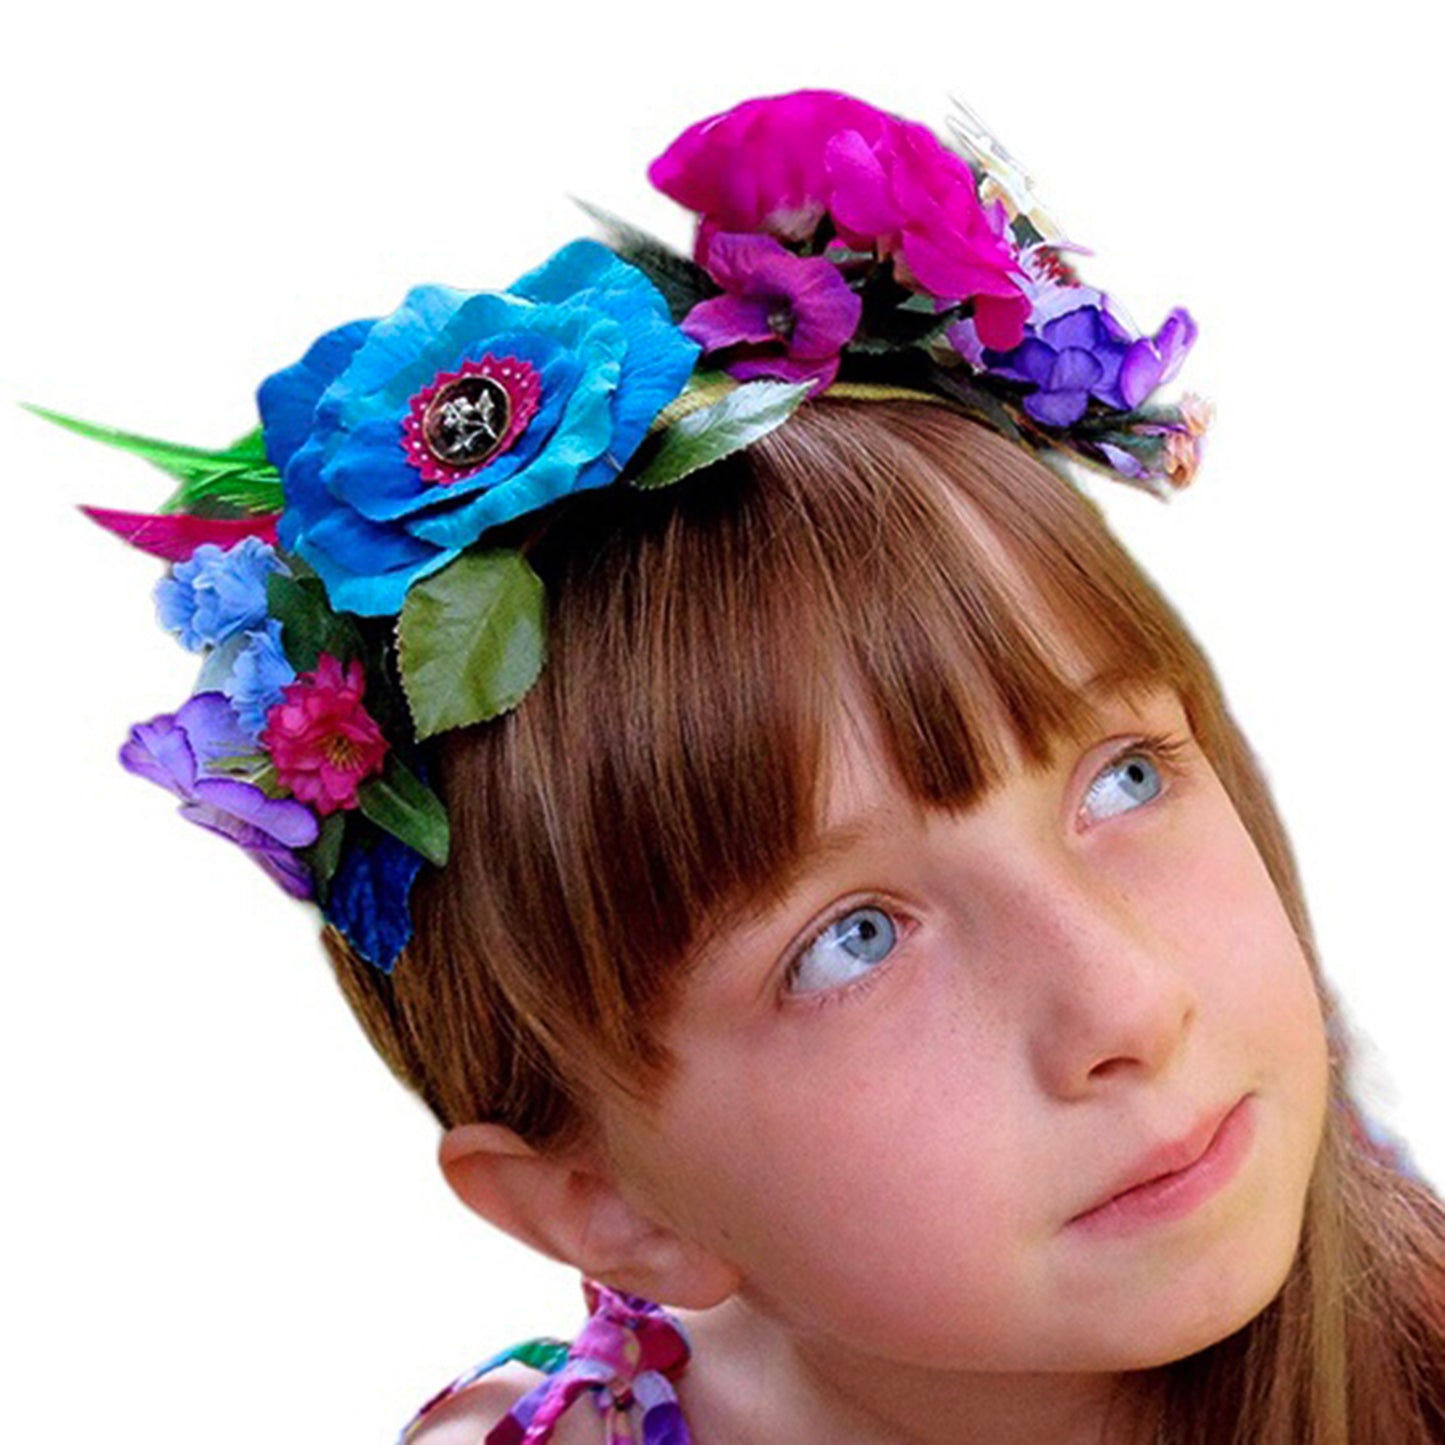 Girls Floral Hairband Turquoise Blue and Hot Pink Rose Tiara